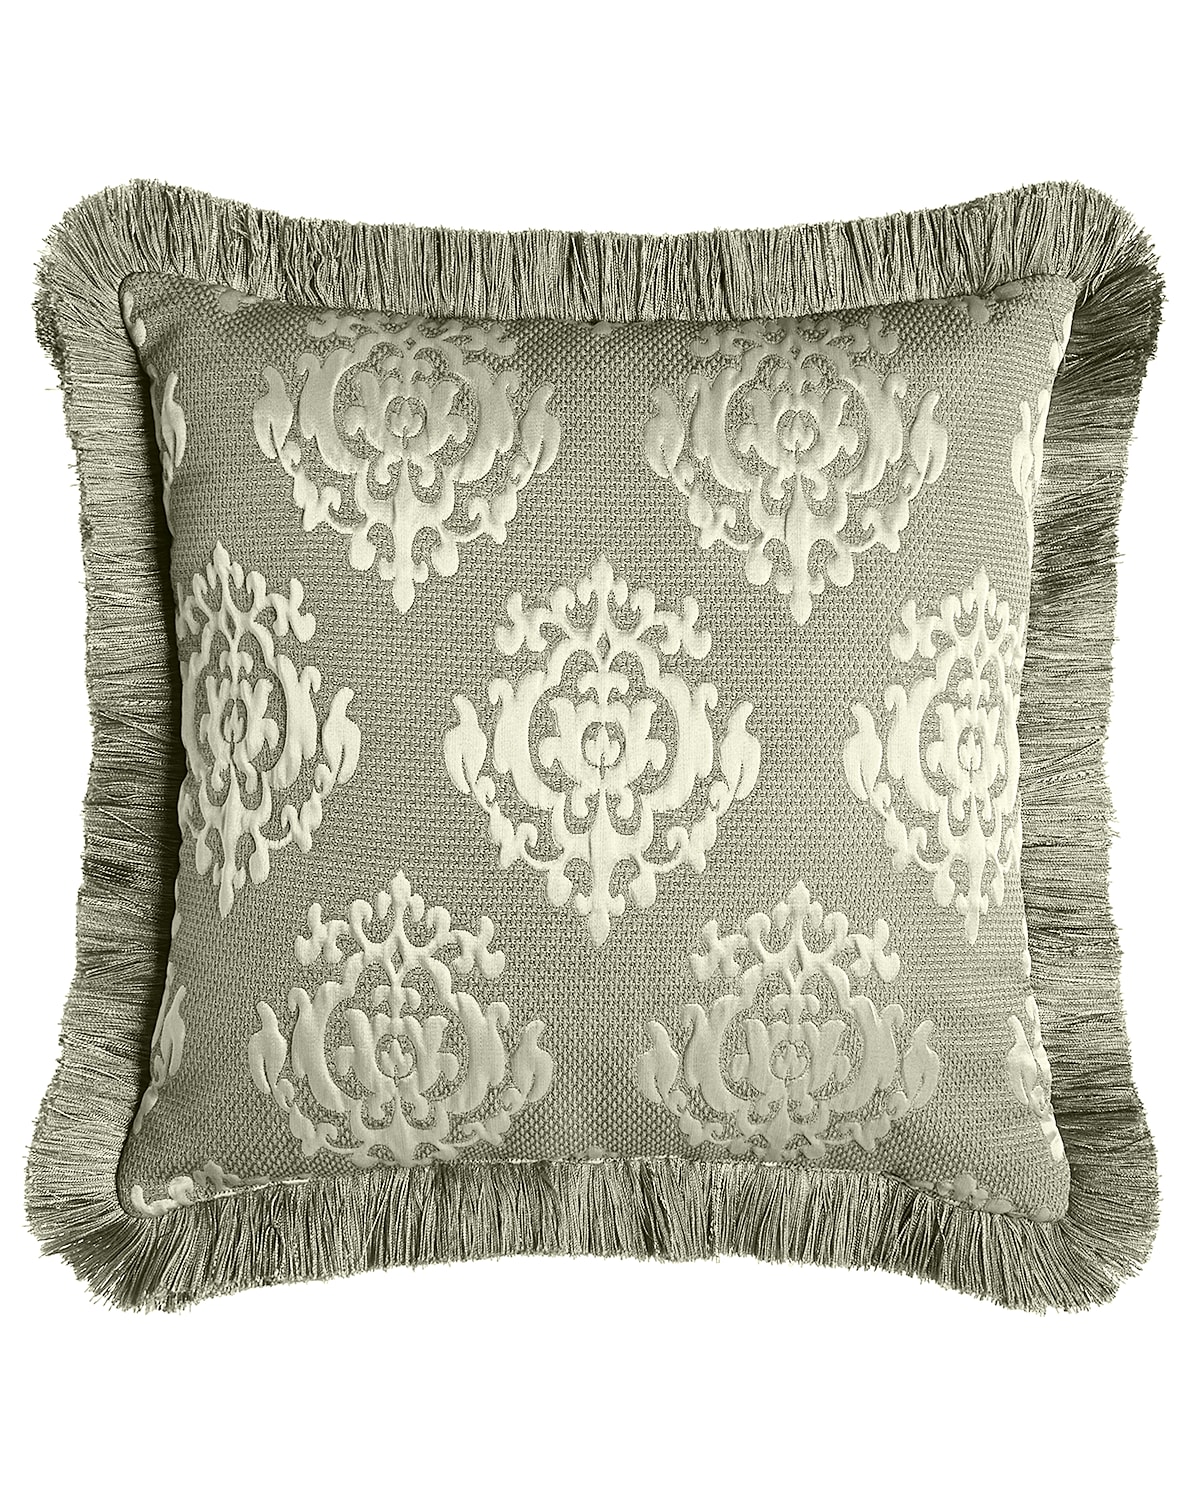 Image Dian Austin Couture Home Le Plaza Reversible Pillow with Fringe,  18"Sq.